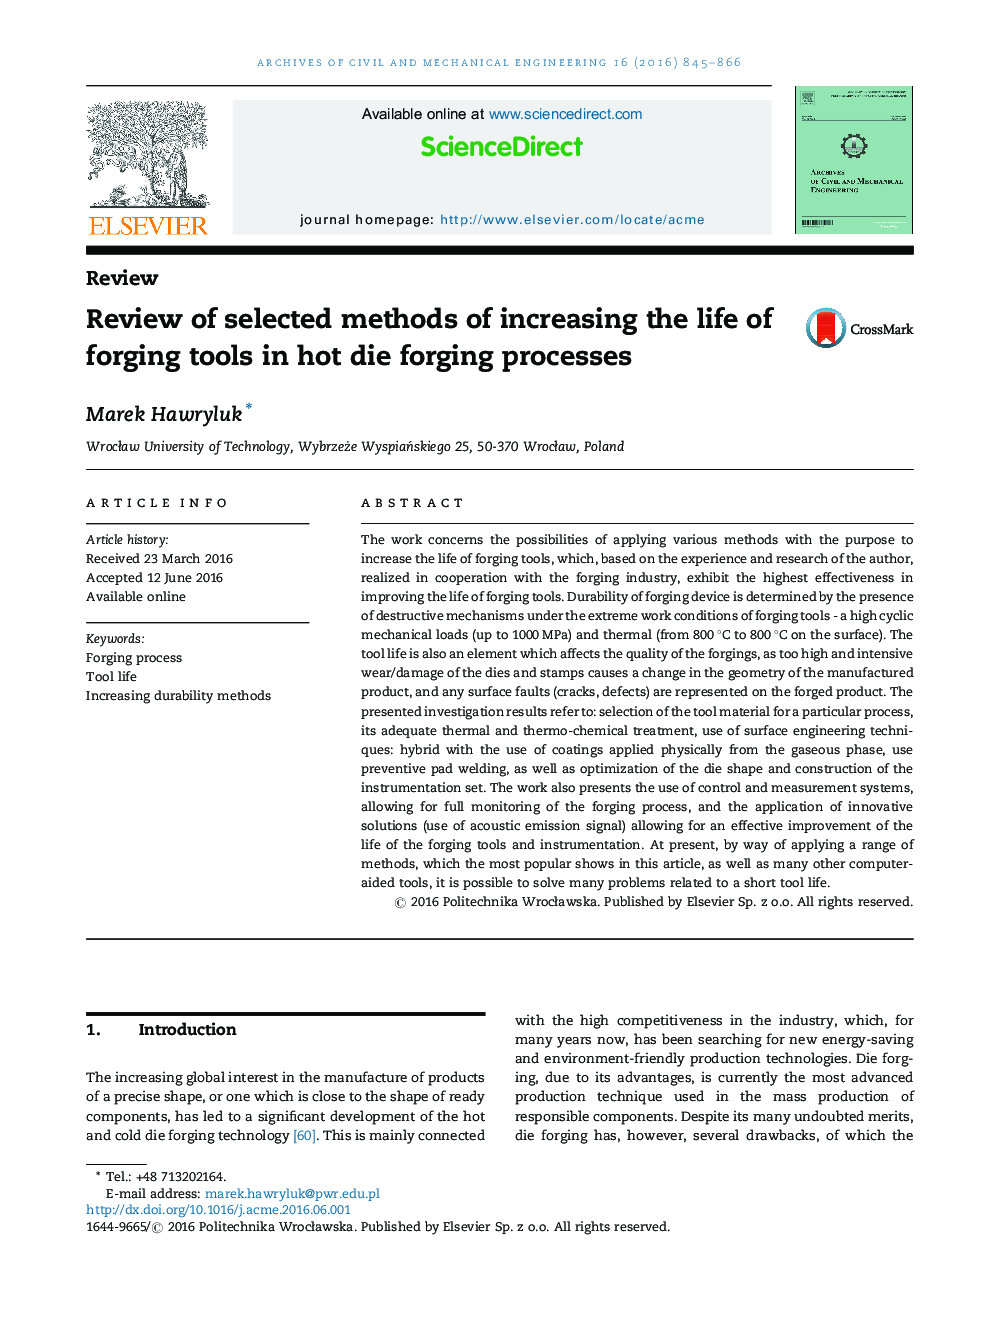 Review of selected methods of increasing the life of forging tools in hot die forging processes